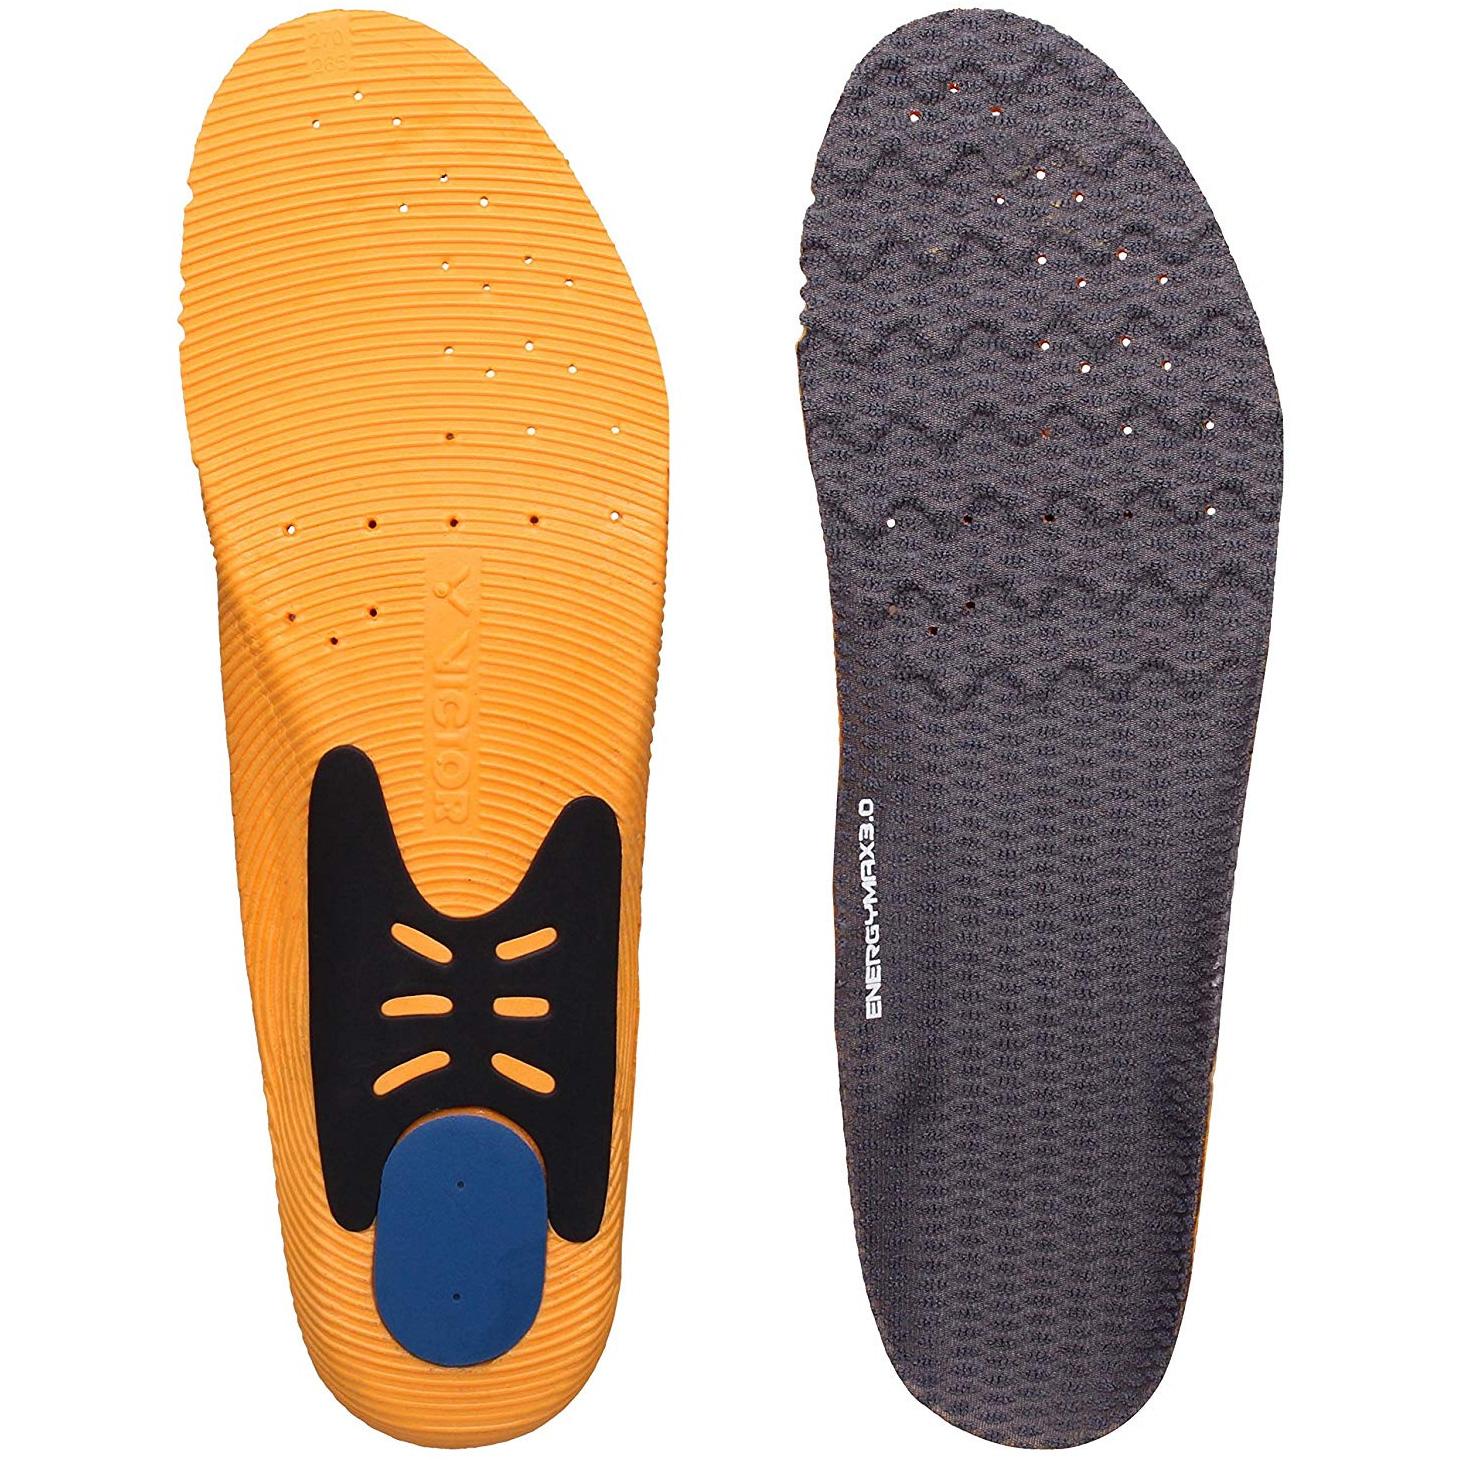 victor insole